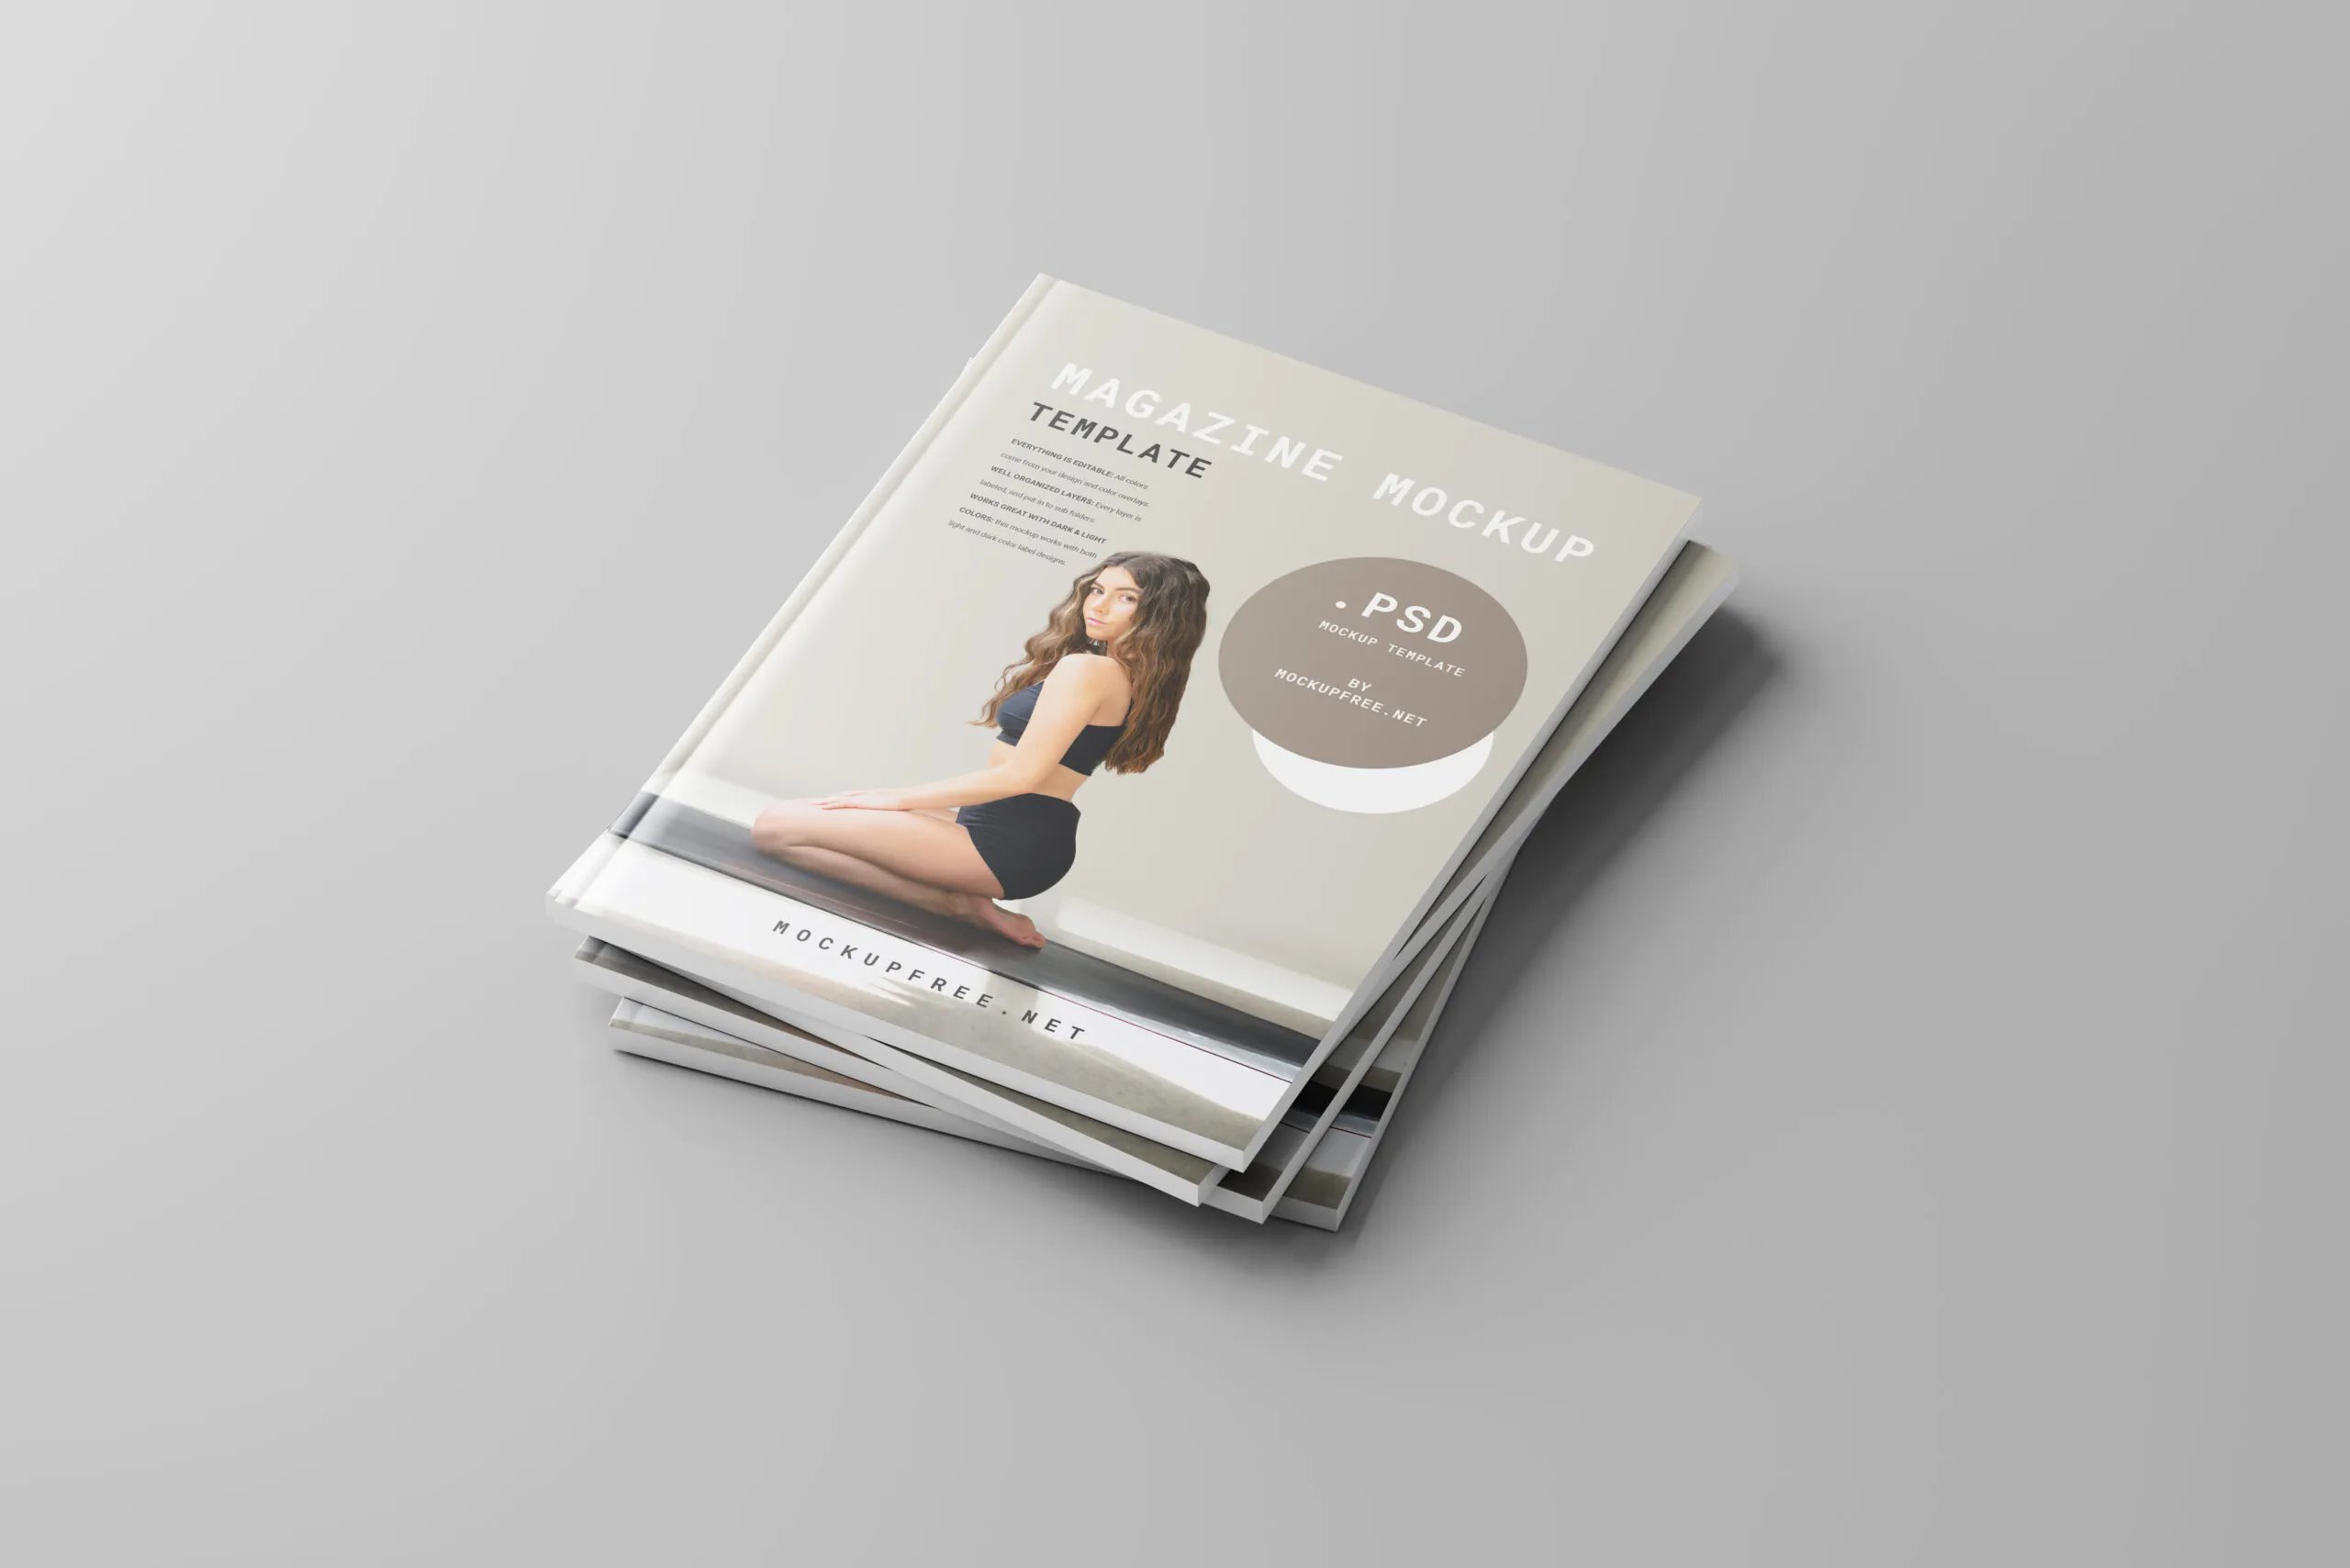 5 Magazine Cover Mockups in Distinct Visions FREE PSD